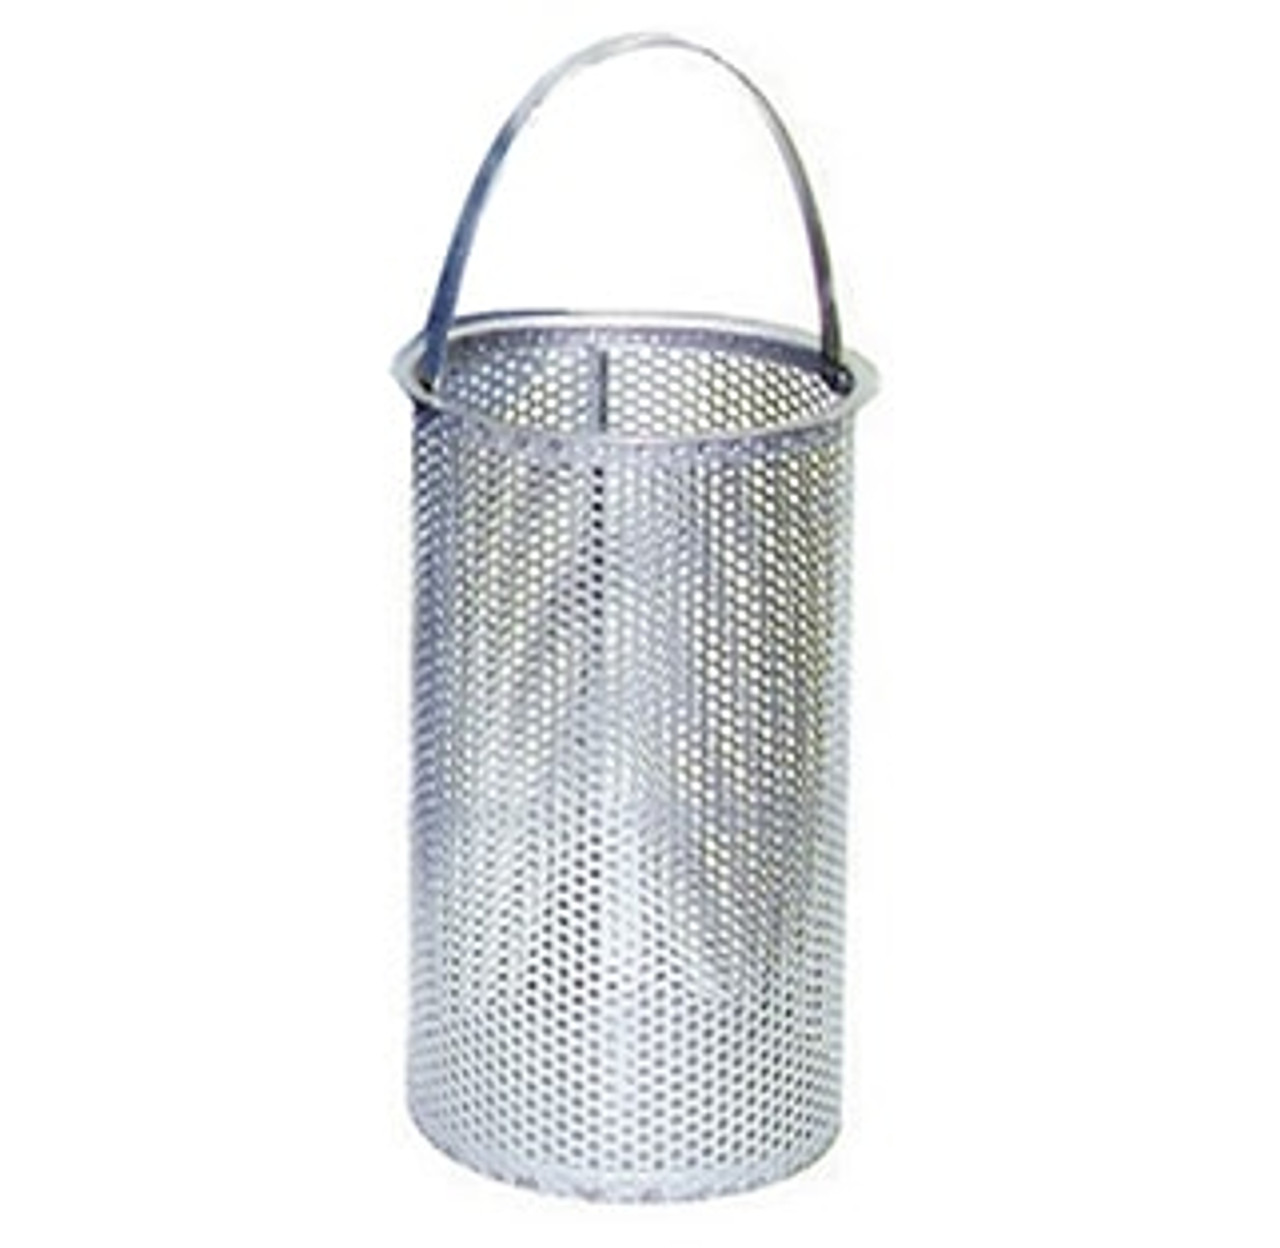 100 Mesh and 5/32" Perforation Replacement Basket for 5" Eaton Model 30R Strainer